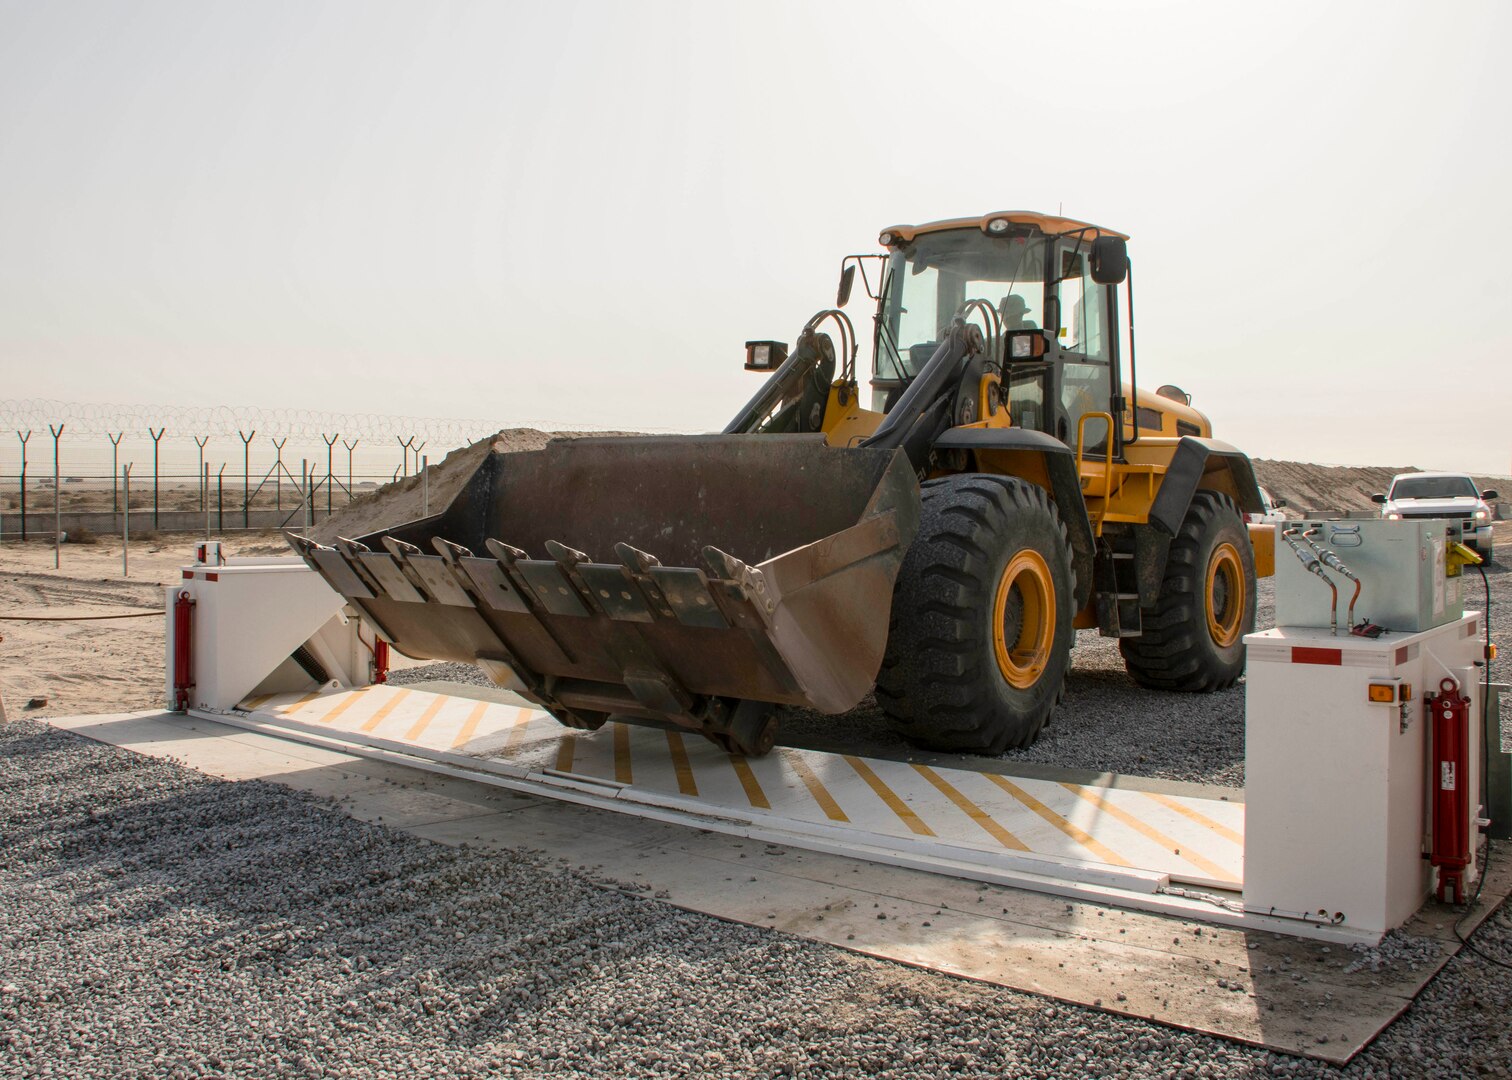 Staff Sgt. Phillip Smith of the 557th RED HORSE drives a front-end loader over a barricade at the new entry control point at an undisclosed location in Southwest Asia Dec. 30, 2016. RED HORSE assisted the 387th Expeditionary Support Squadron civil engineering flight with portions of the road project requiring heavy equipment. (U.S. Air Force photo/Senior Airman Andrew Park)